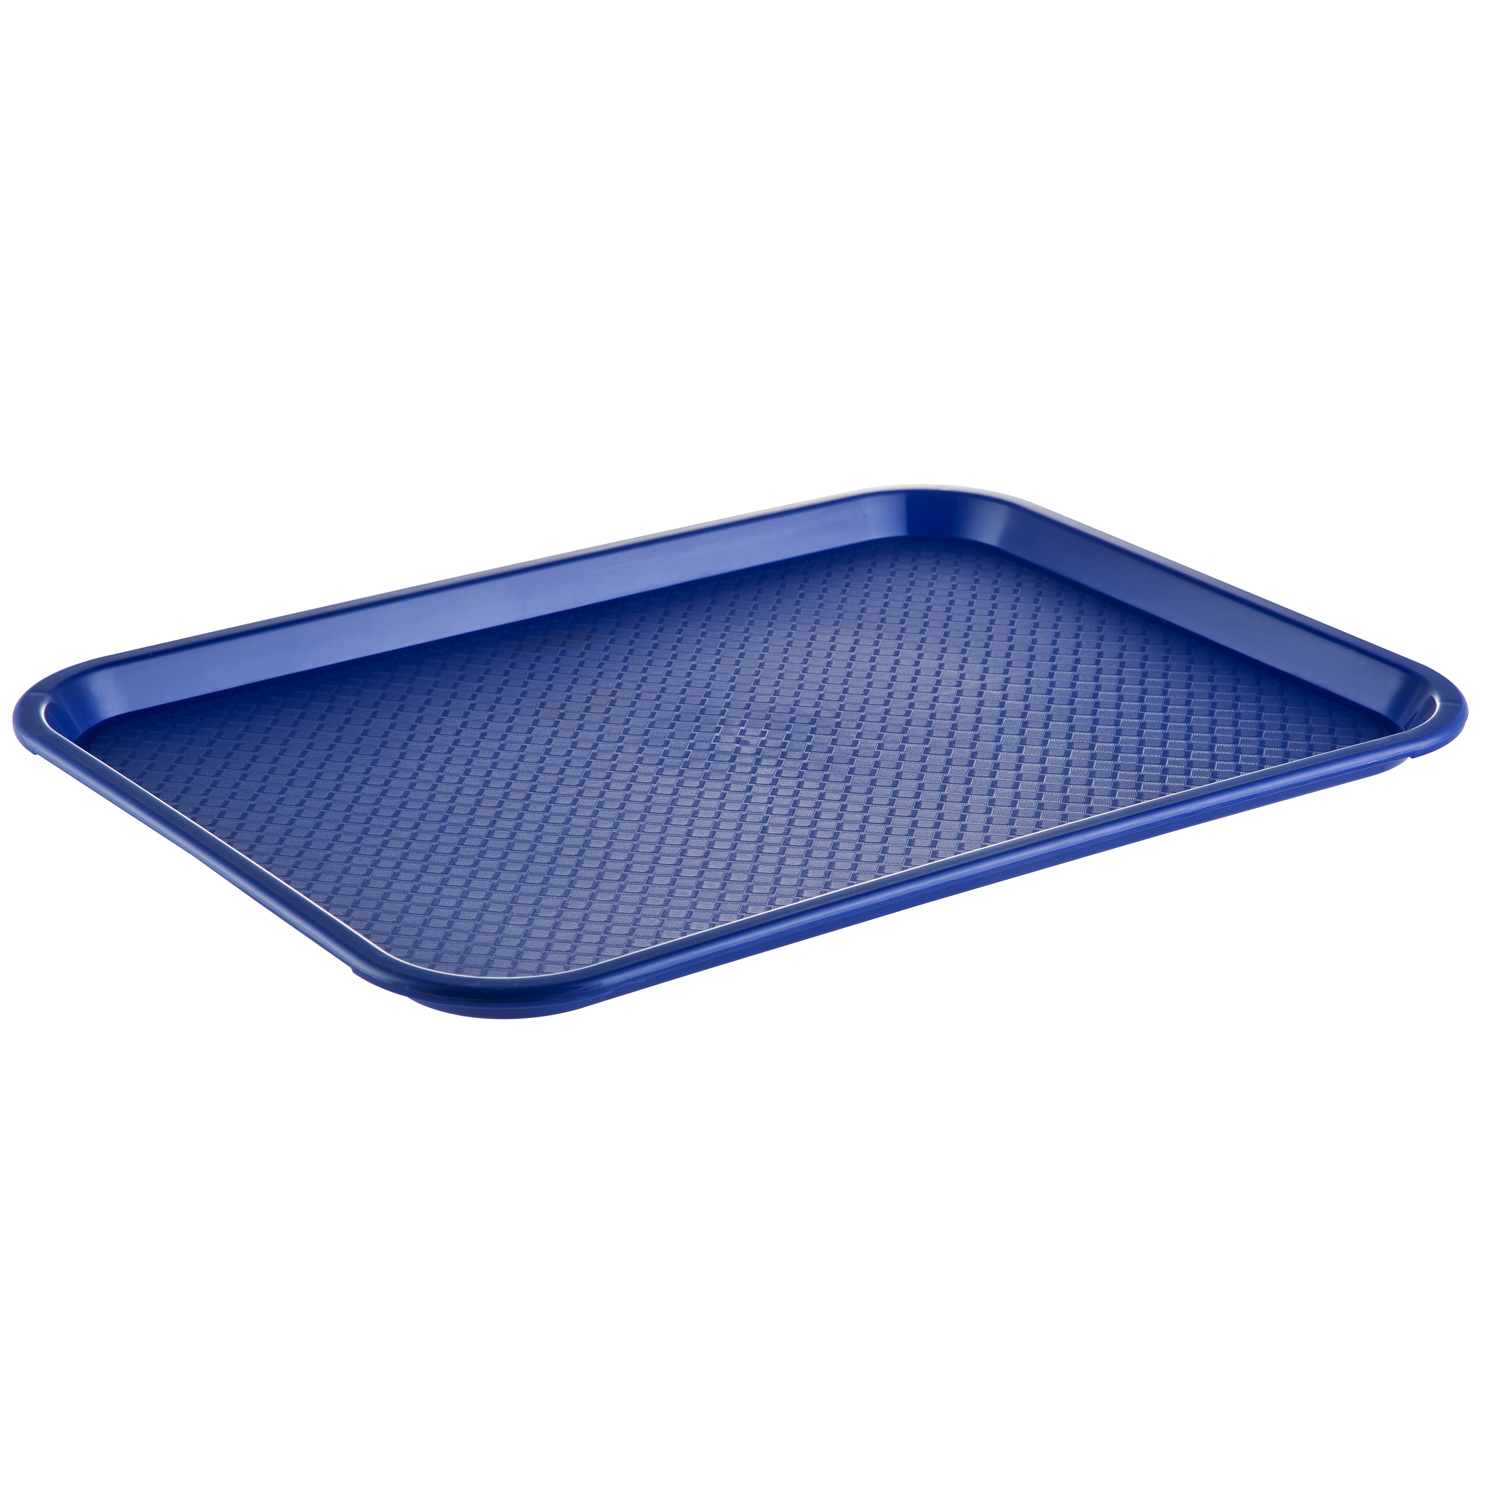 CAC China DSPT-1418B Blue Fast Food/Cafeteria Tray, 18" x 14" 